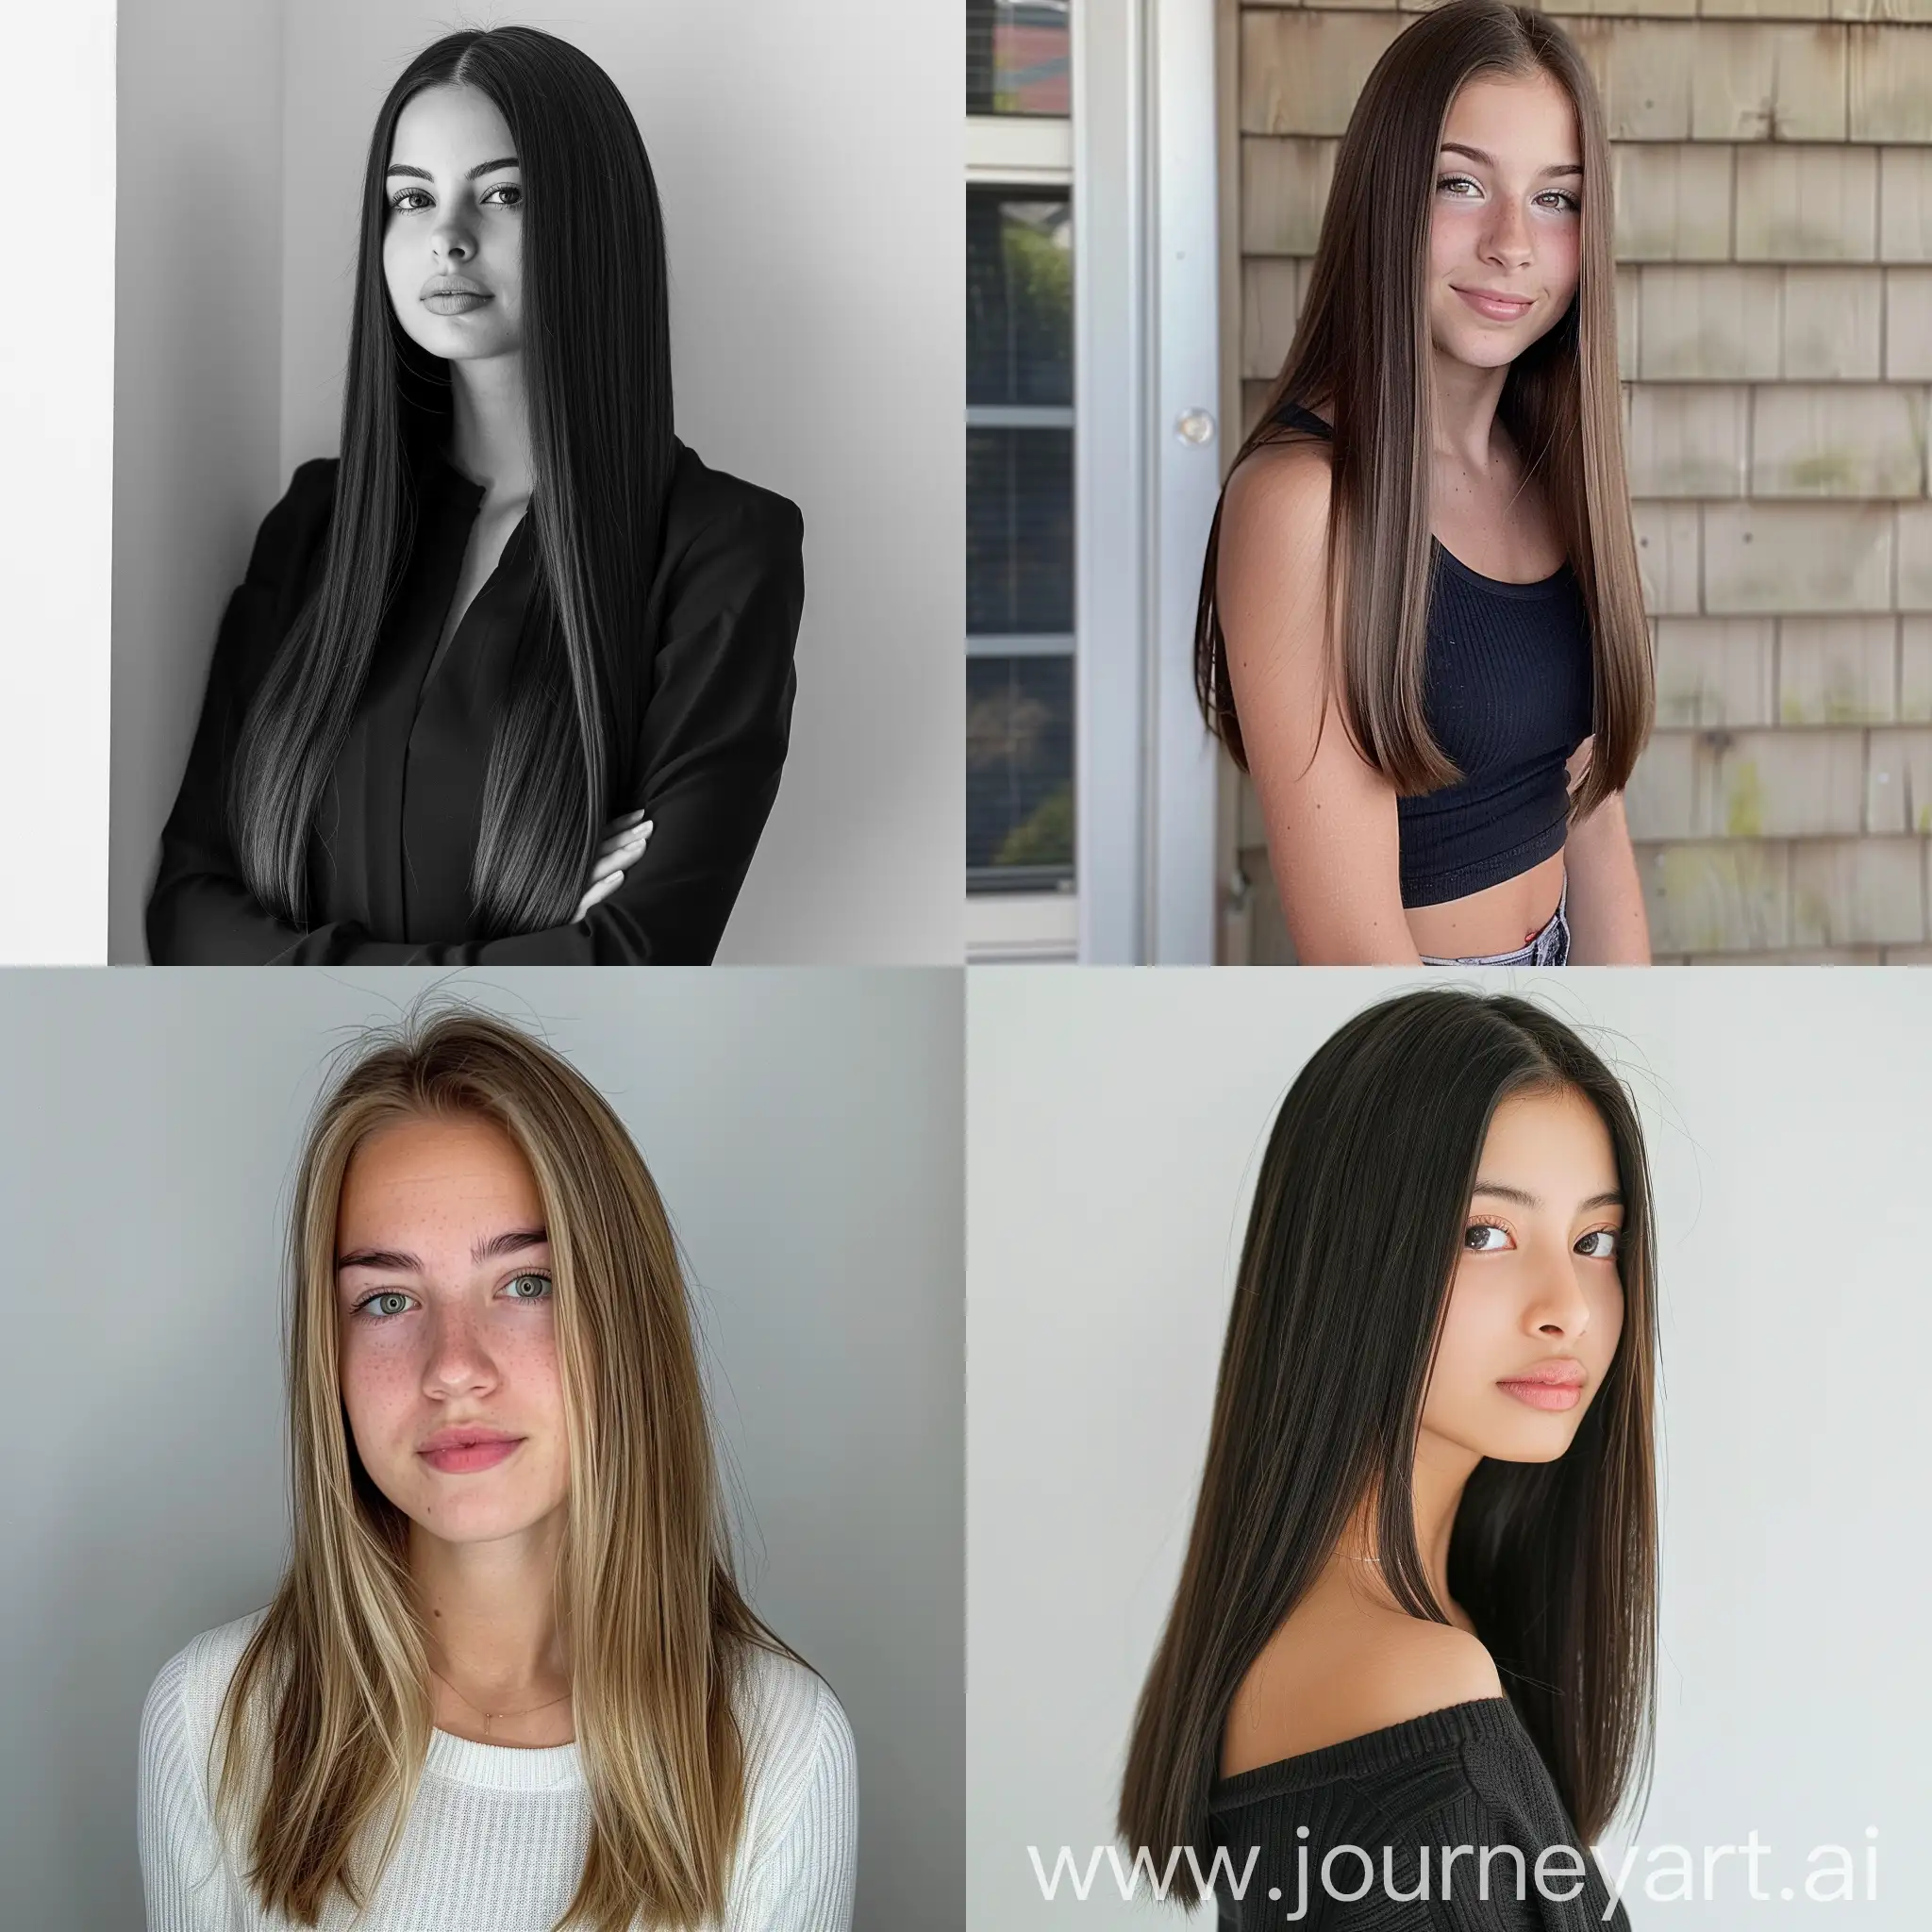 Young-Woman-with-Straight-Hair-in-FullLength-Portrait